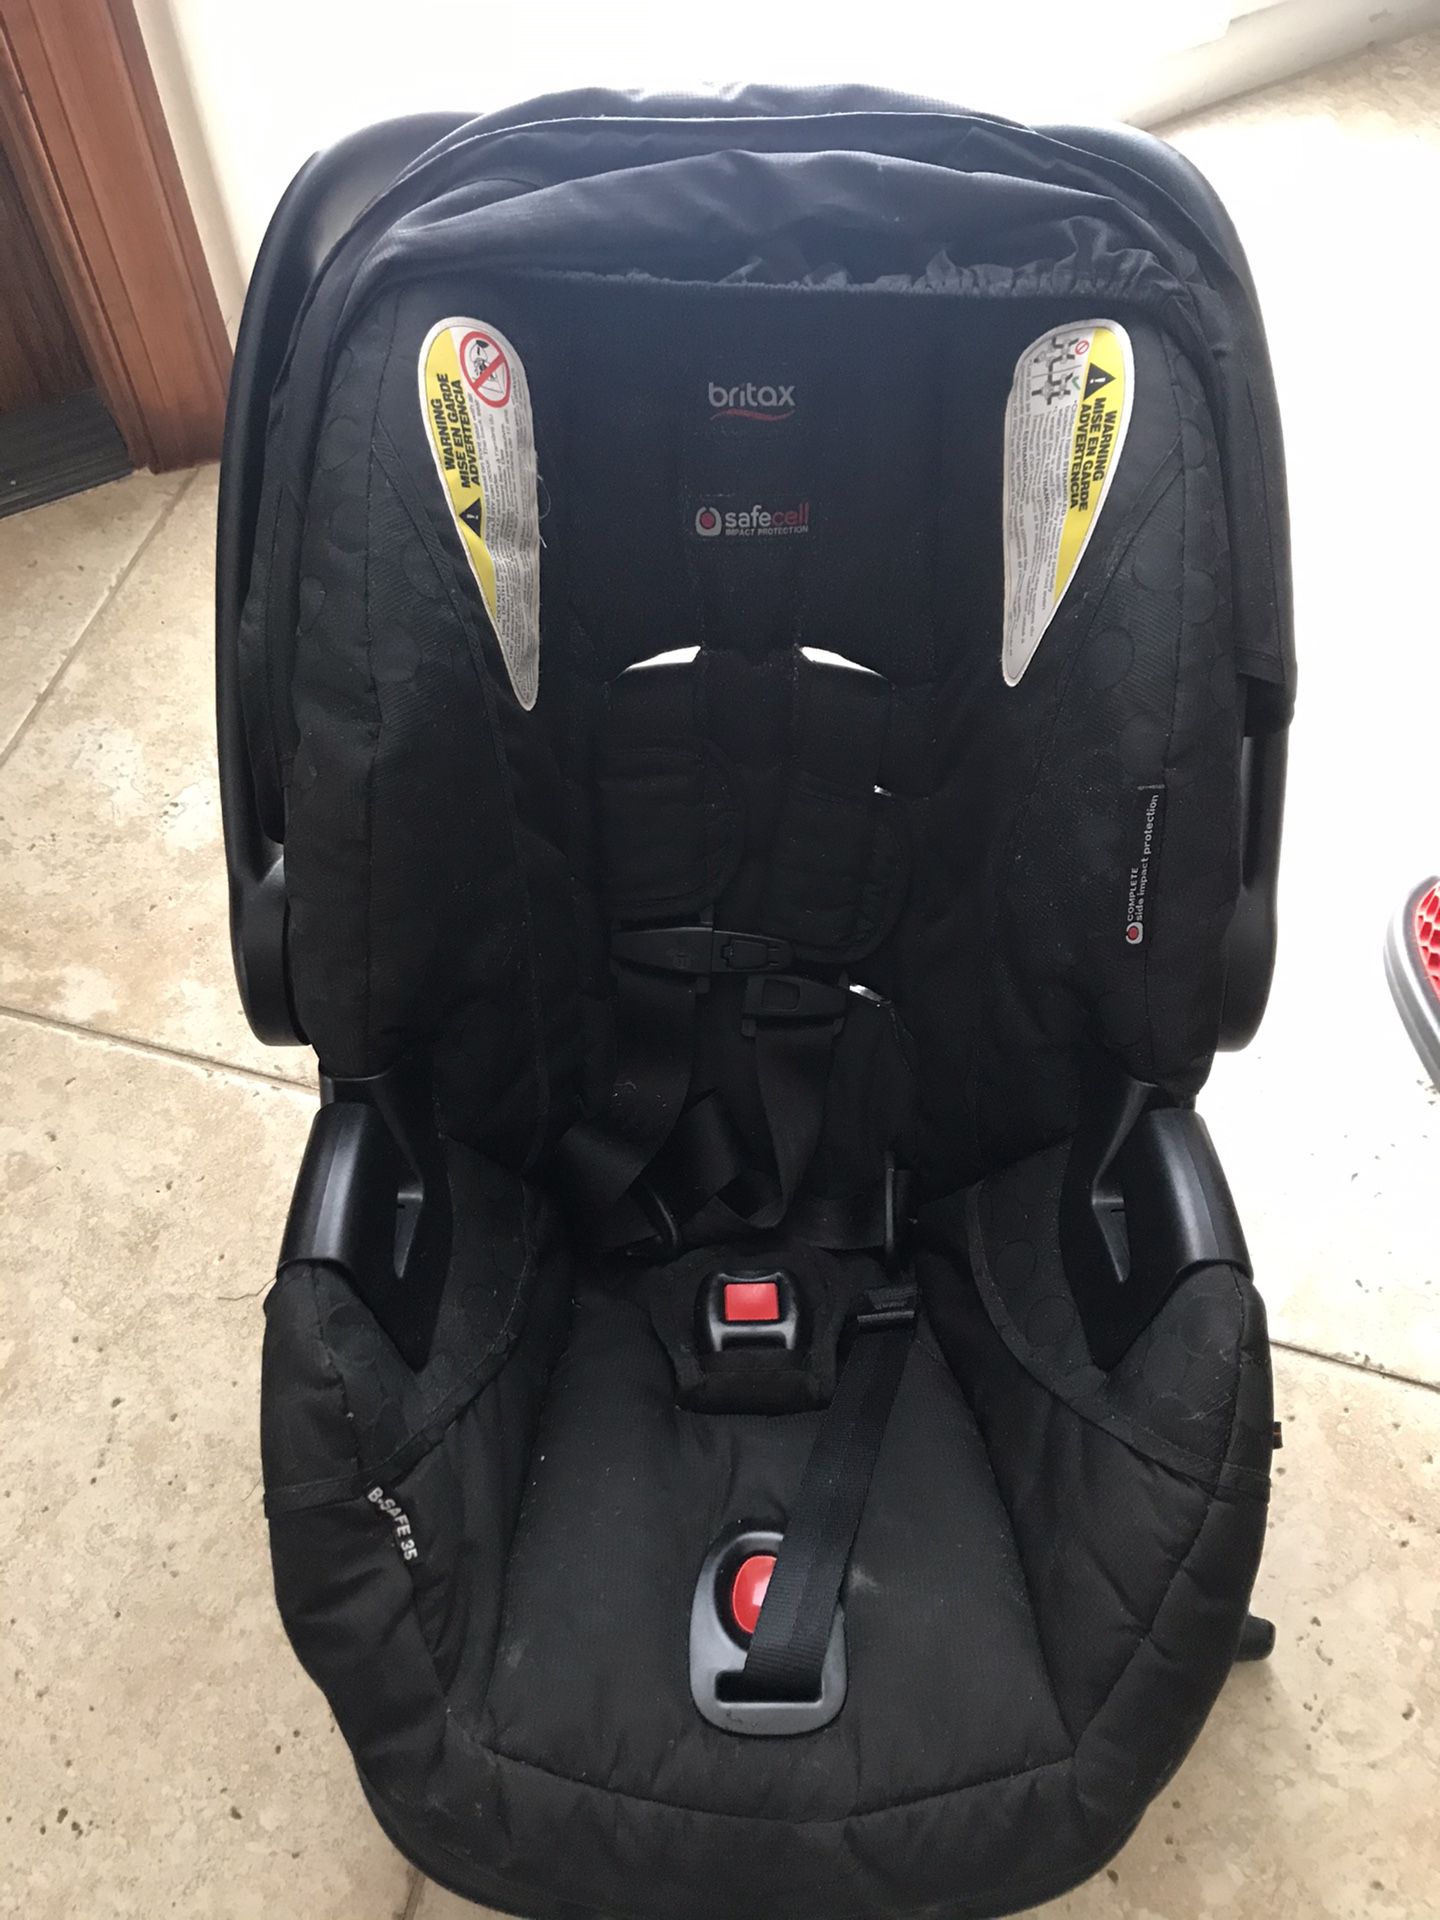 Britax car seats with bases, matching stroller and one car seat travel bag